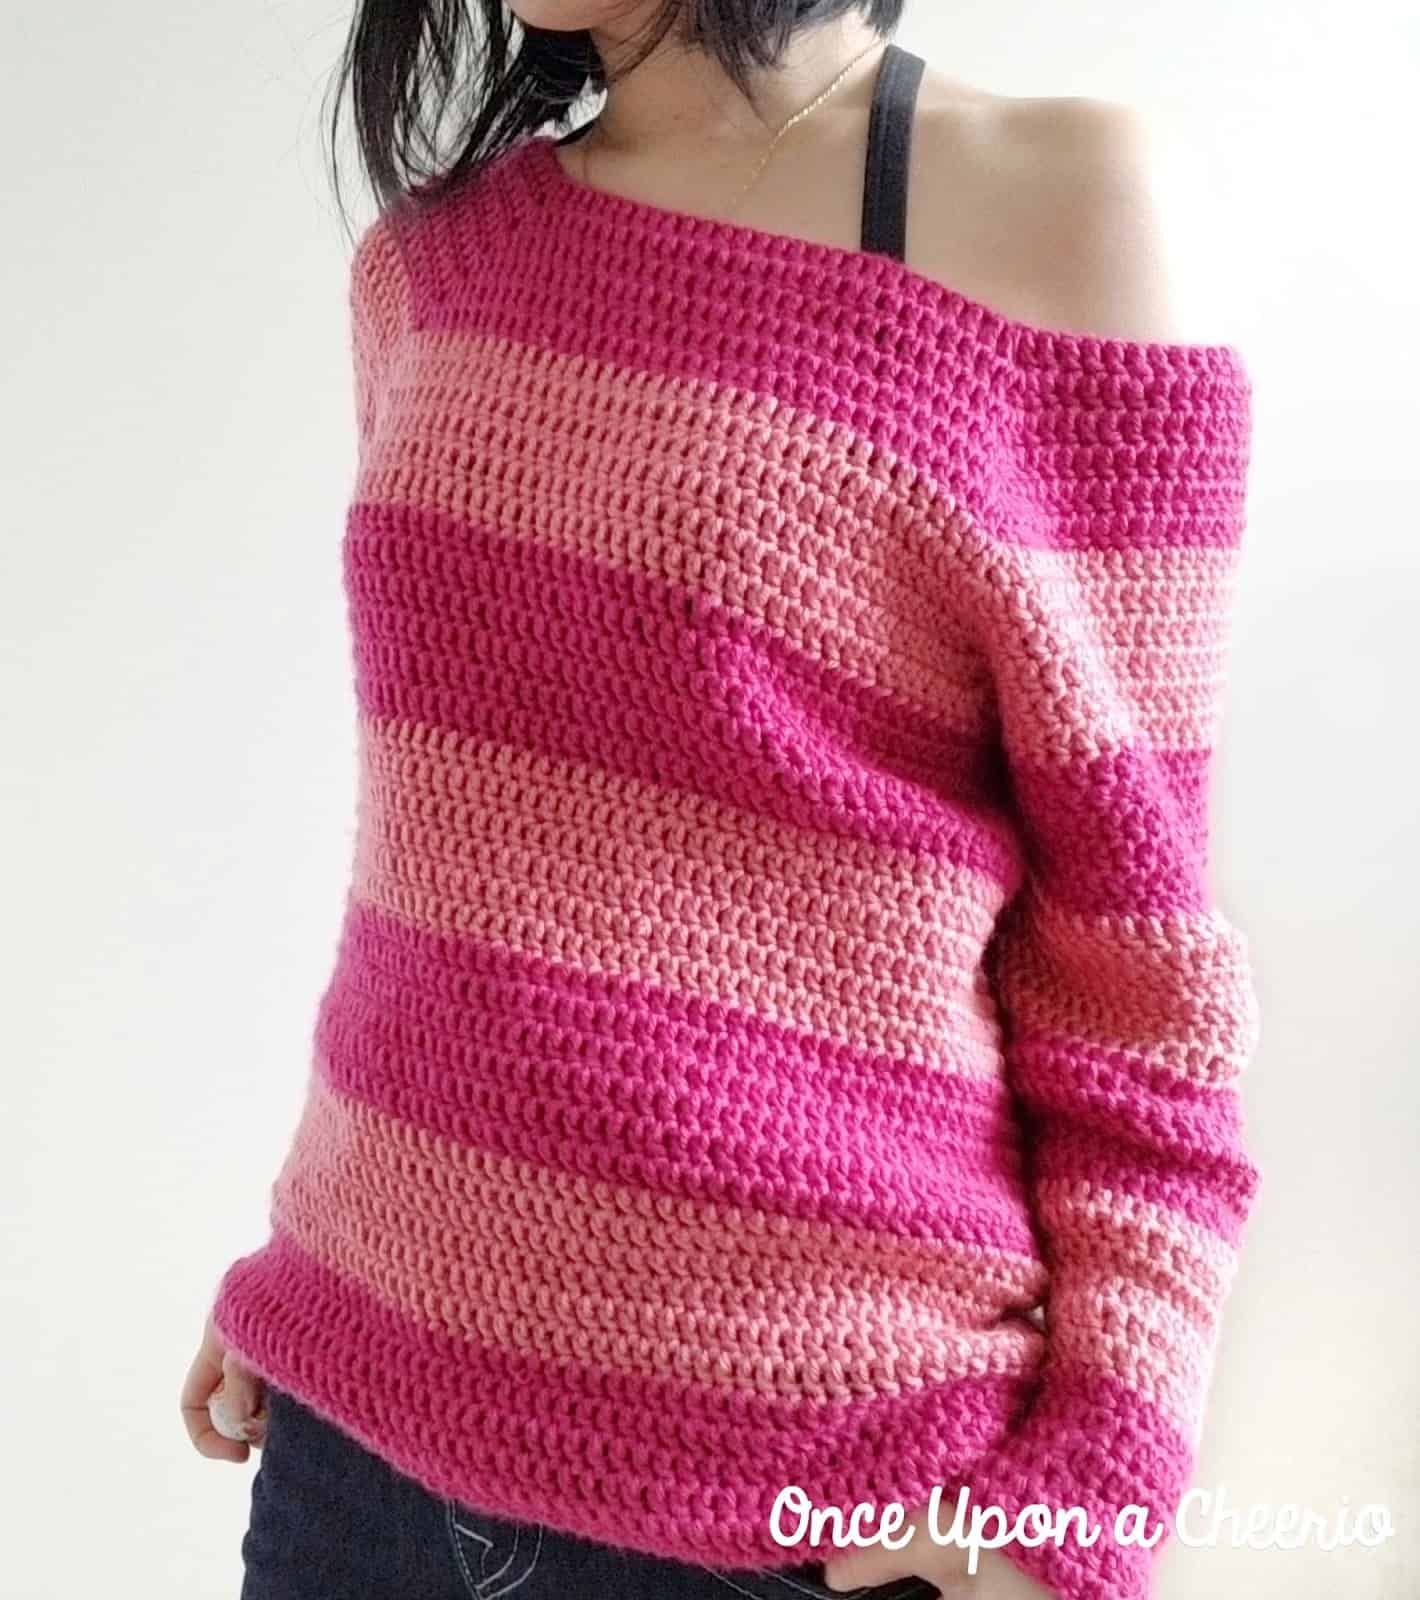 Cheshire Dreams Sweater Crochet Pattern - Once Upon a Cheerio